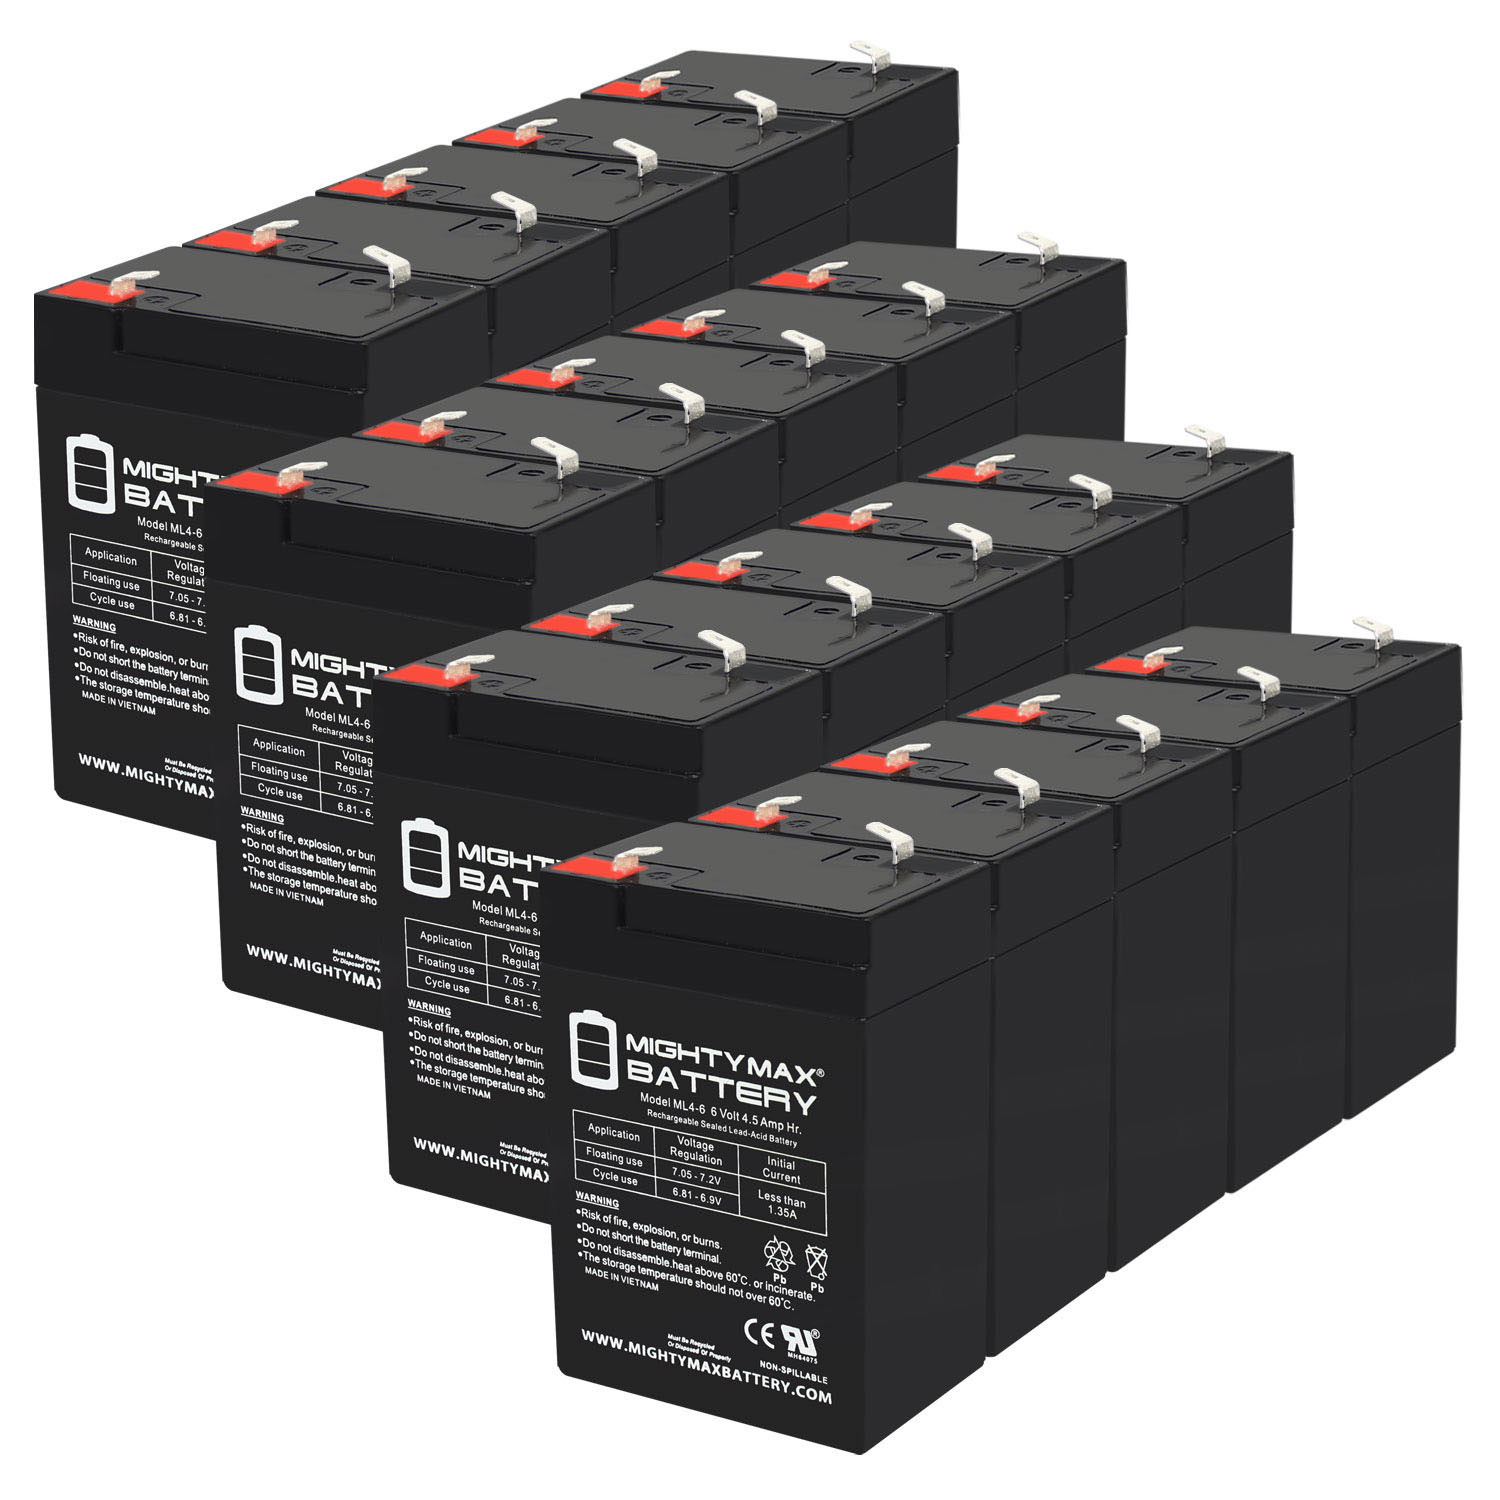 6V 4.5AH SLA Replacement Battery for APC RBK400 - 20 Pack